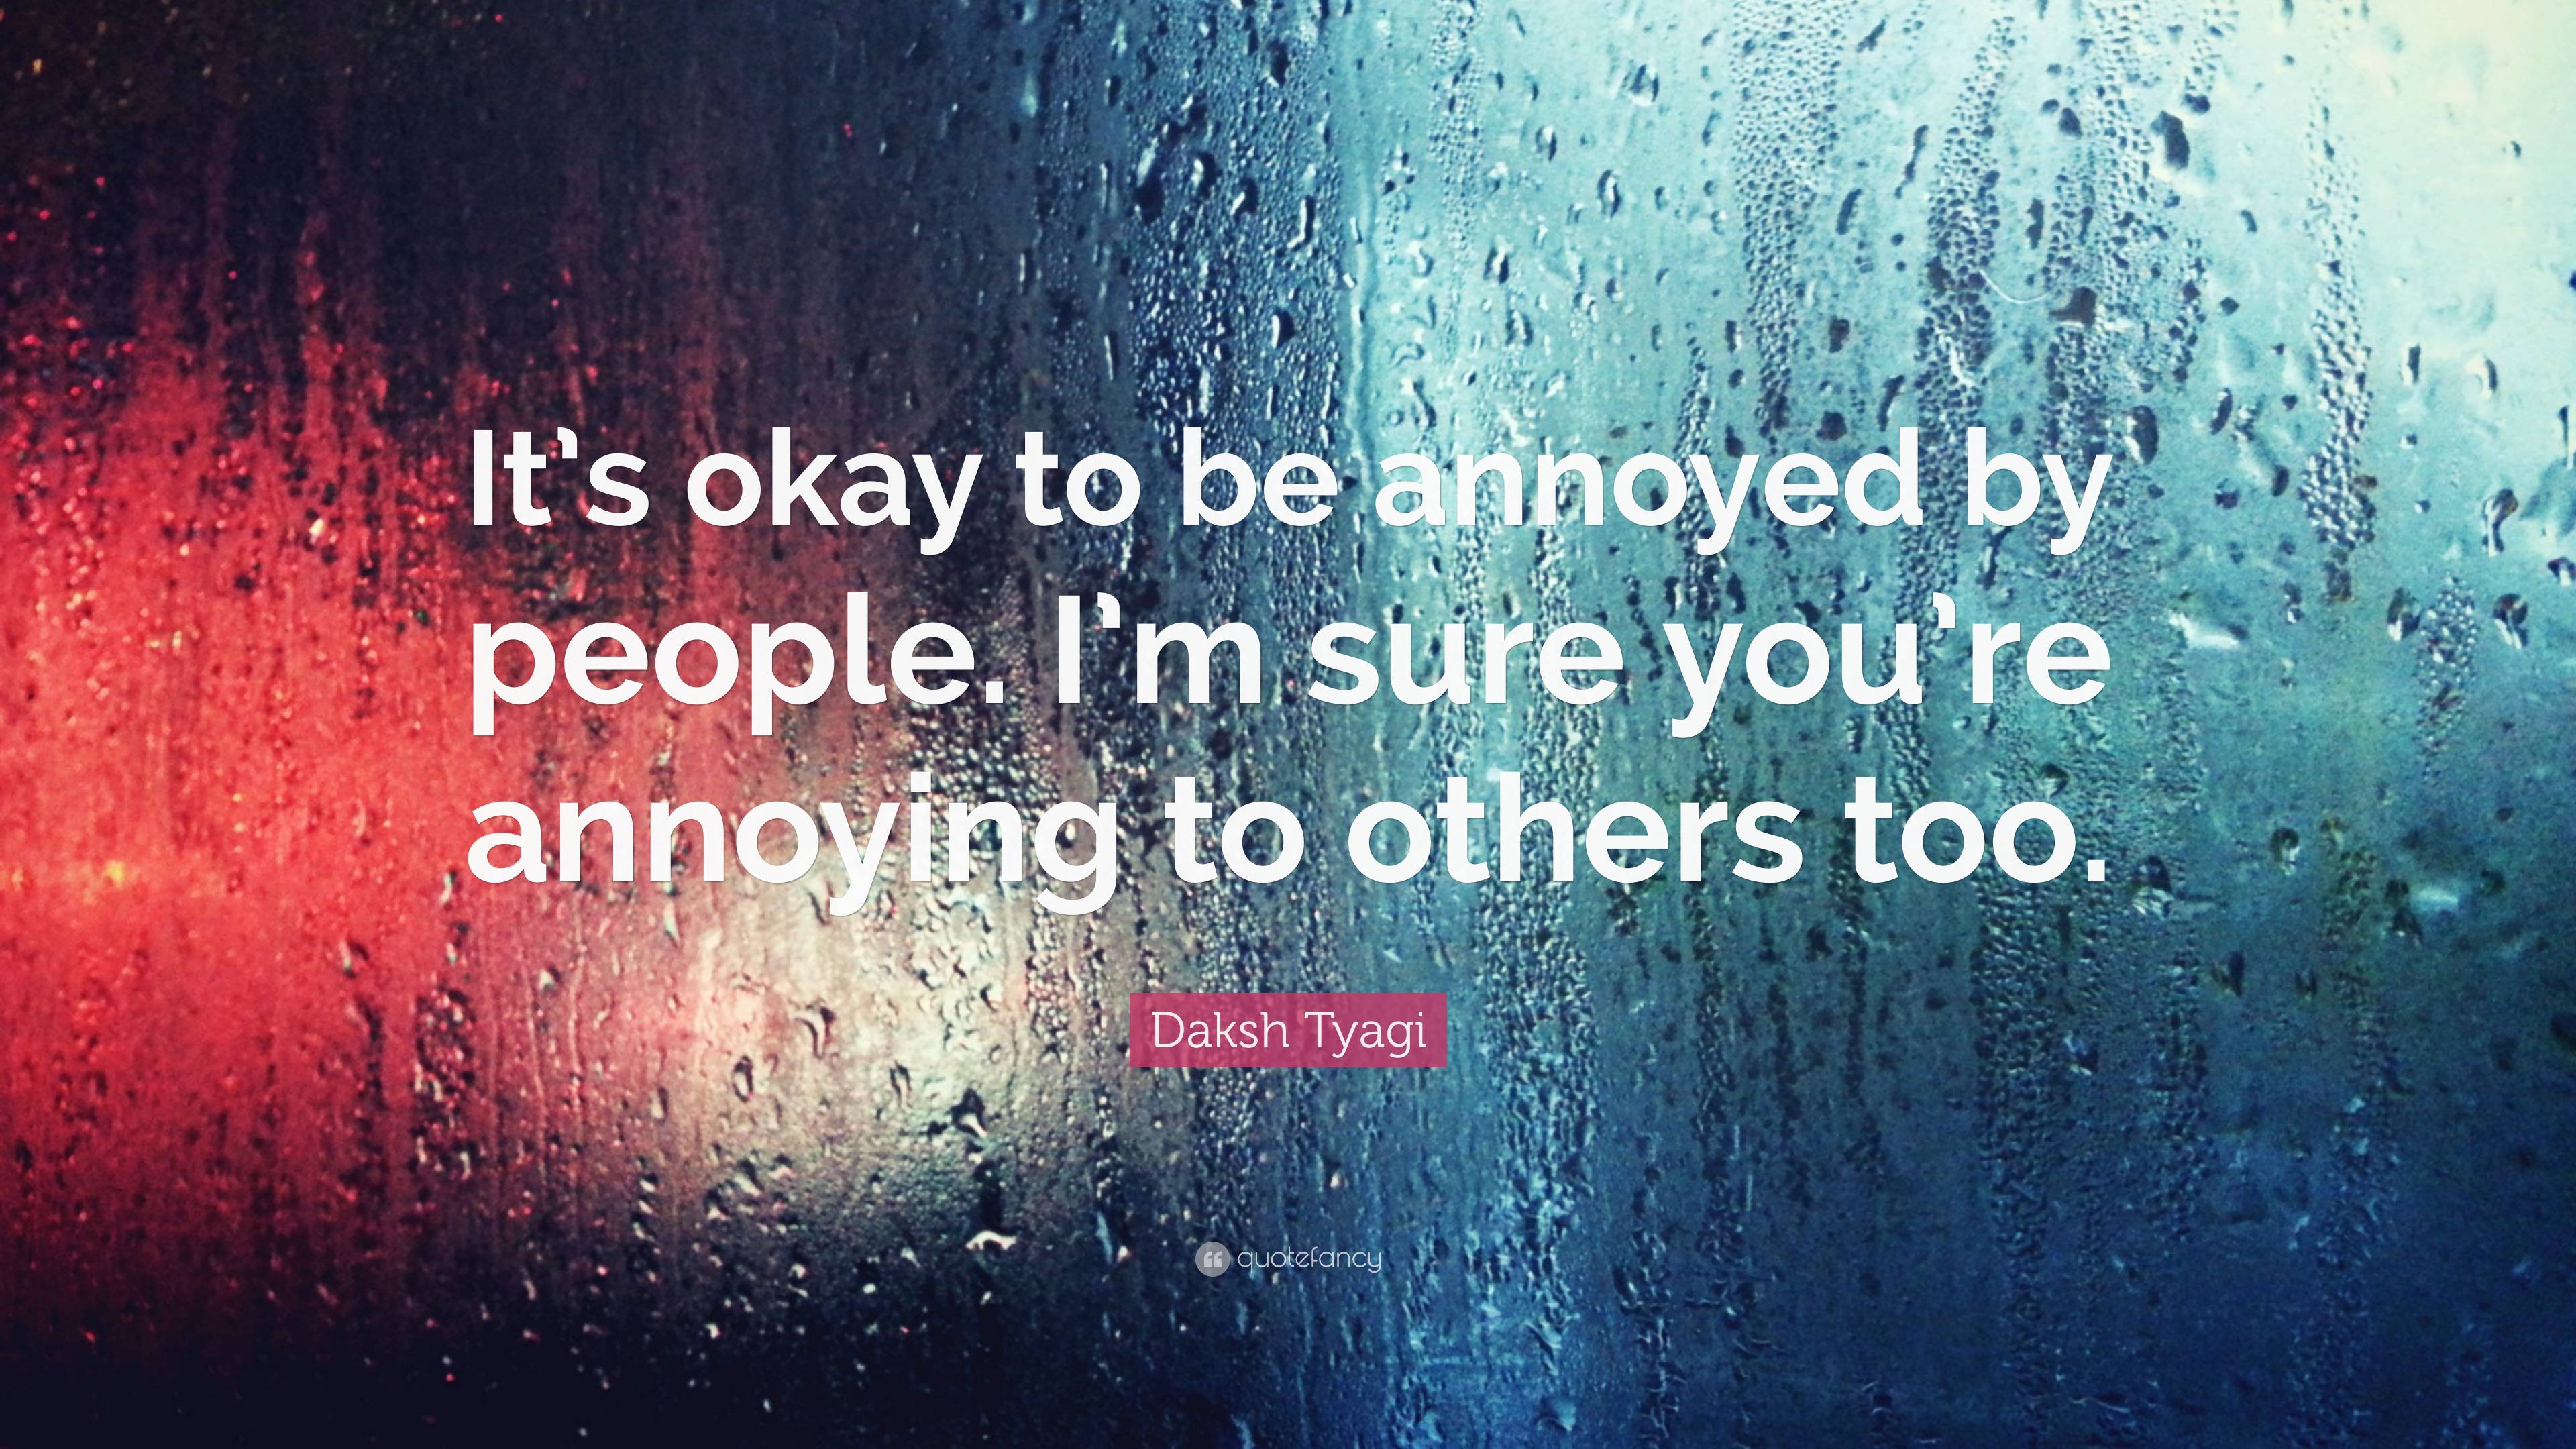 Daksh Tyagi Quote: “It's okay to be annoyed by people. I'm sure